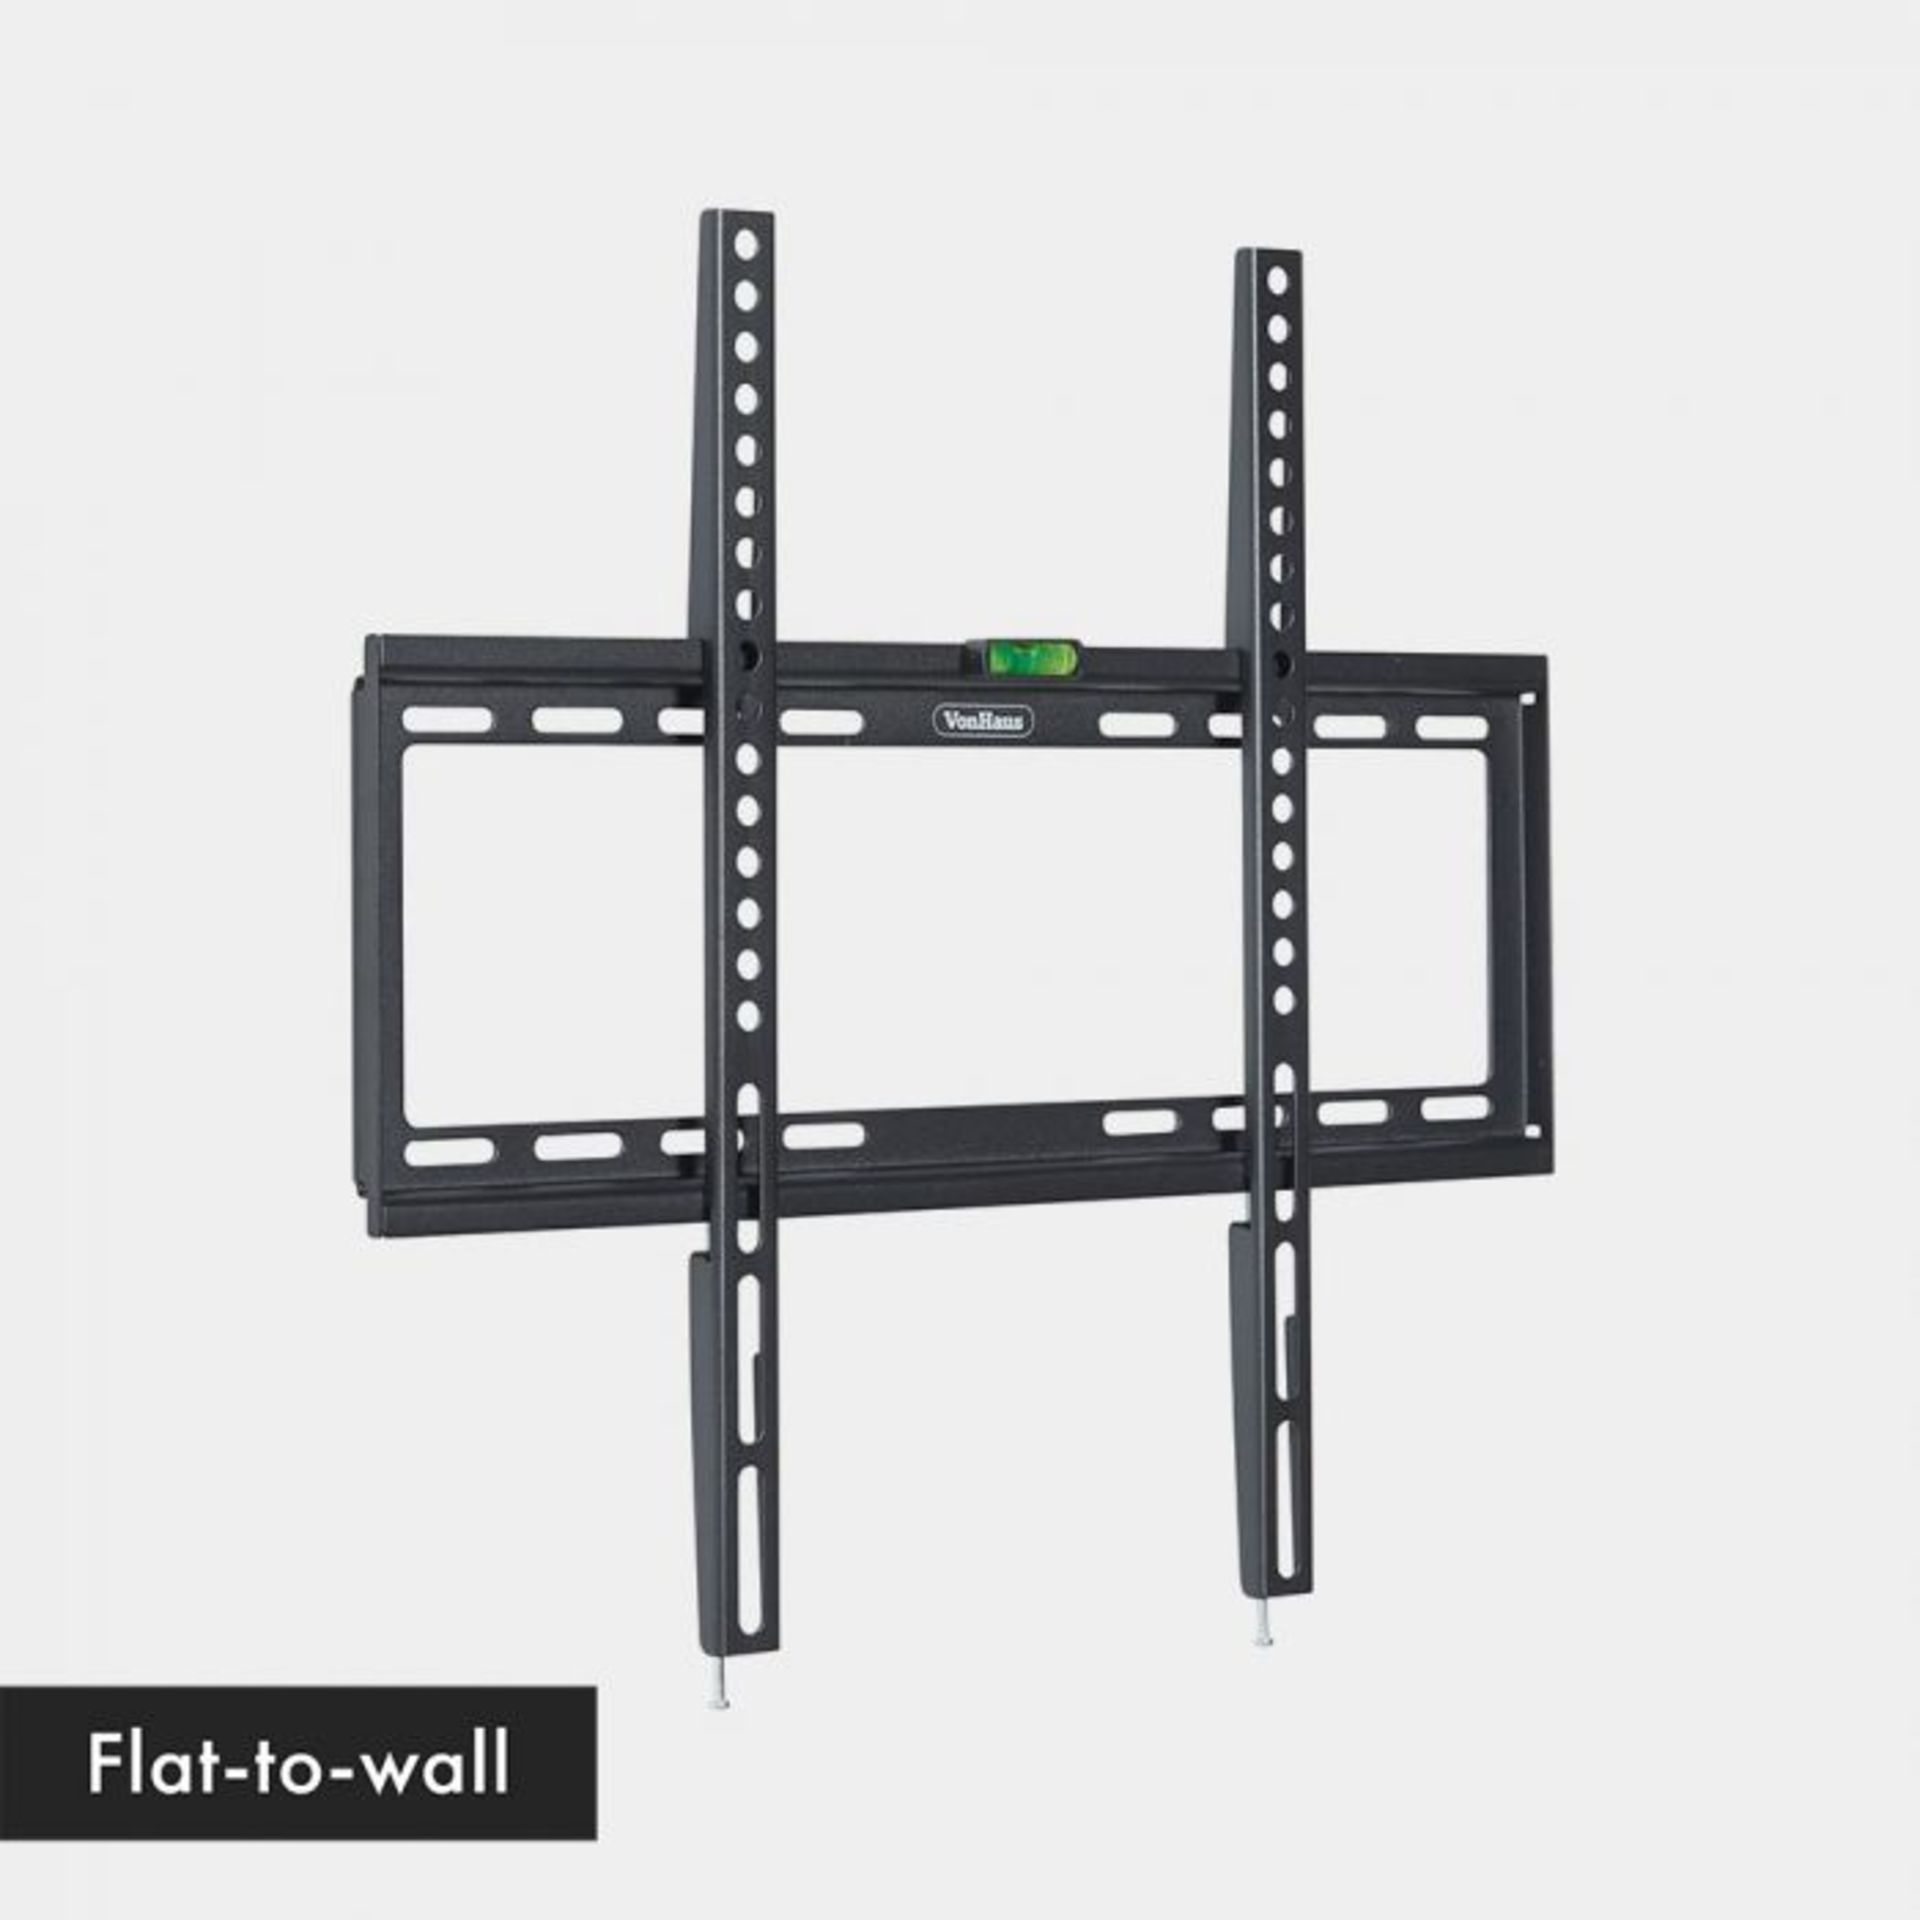 (S77) 32-55 inch Flat-to-wall TV bracket Please confirm your TV’s VESA Mounting Dimensions a... - Image 2 of 5